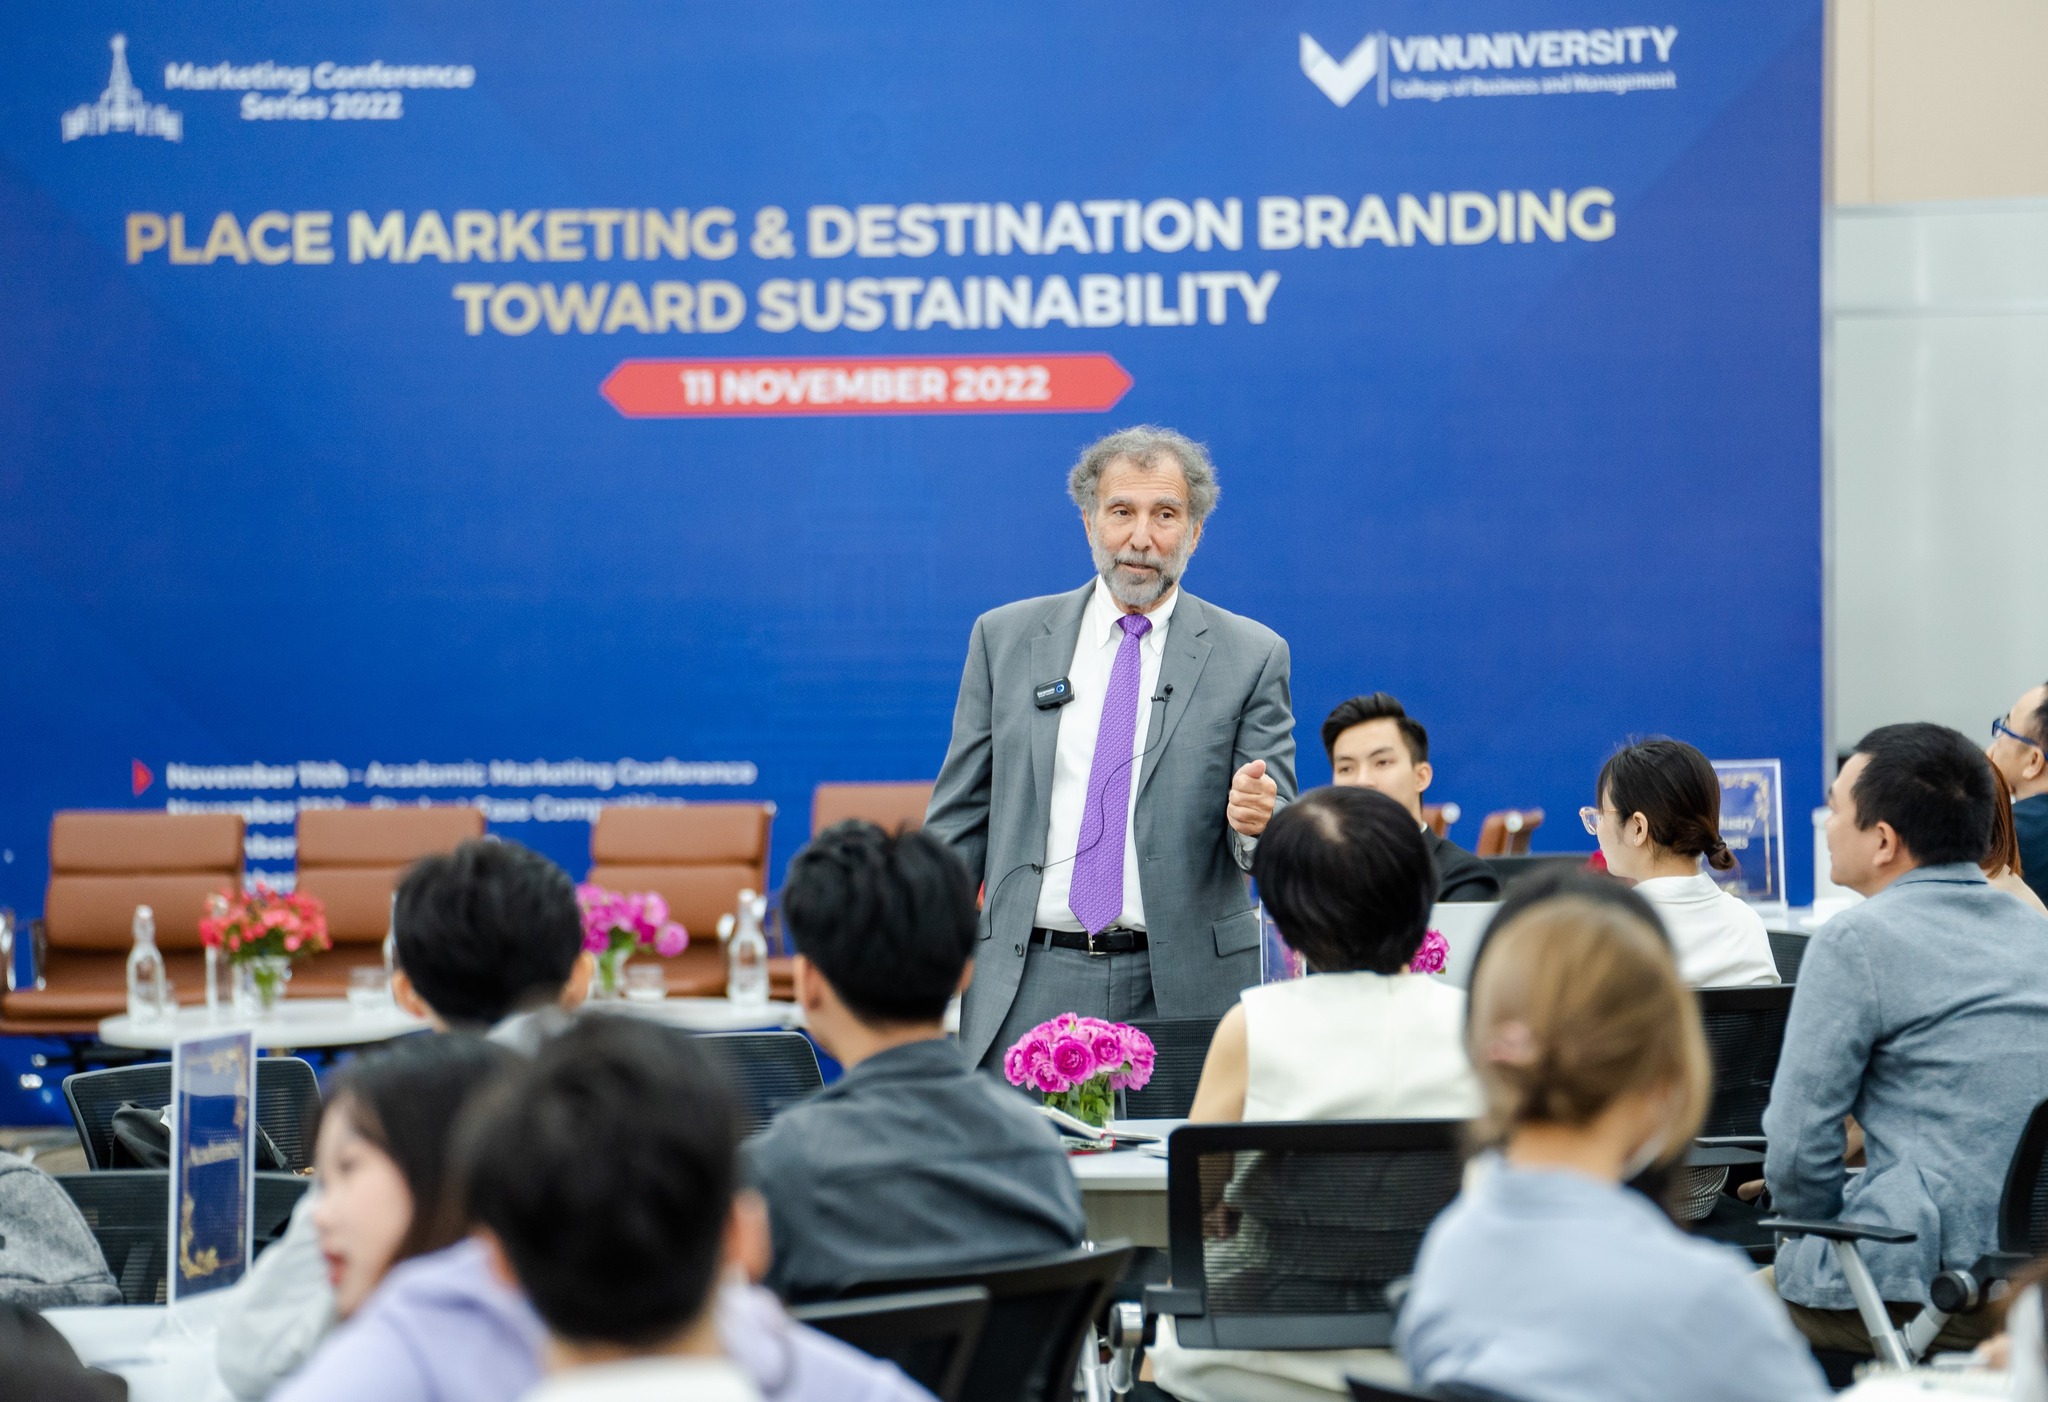 Marketing Conference Series 2022 Impressively Launched with Sharing from Professor David Reibstein